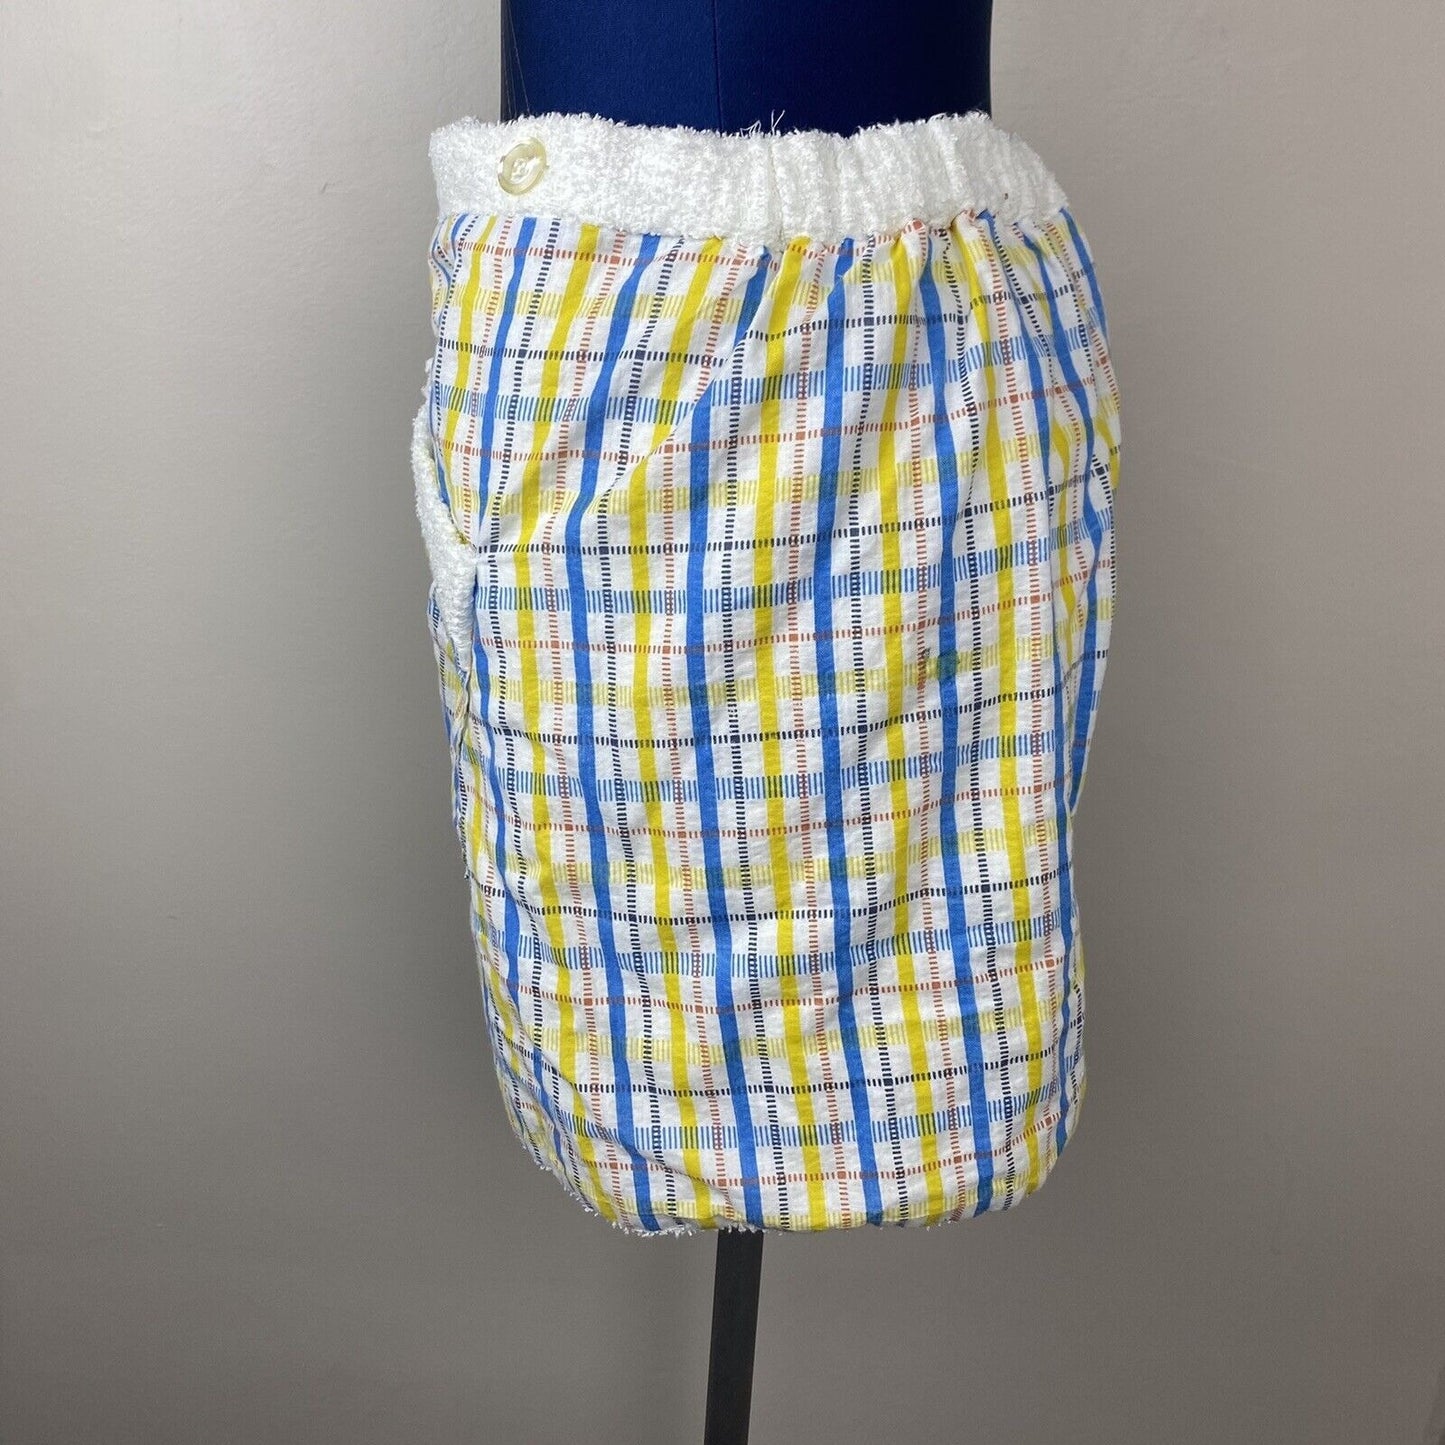 1970s Pleetway Towel Lined Plaid Beach Kilt, Swimsuit Cover Up, Terrycloth Wrap